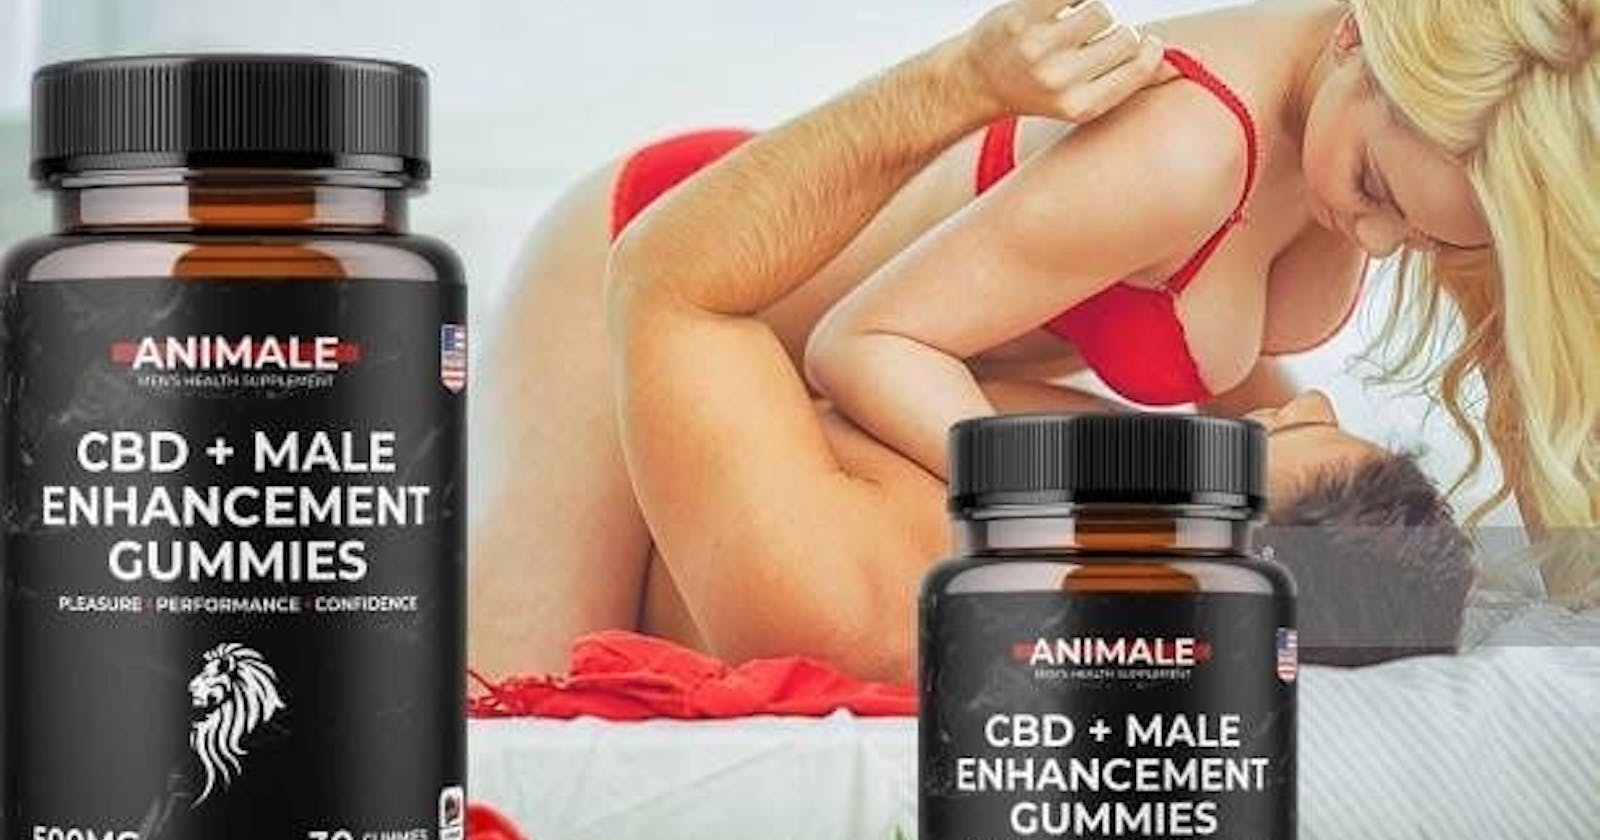 Maximize Your Stamina with Animale CBD Male Enhancement Gummies